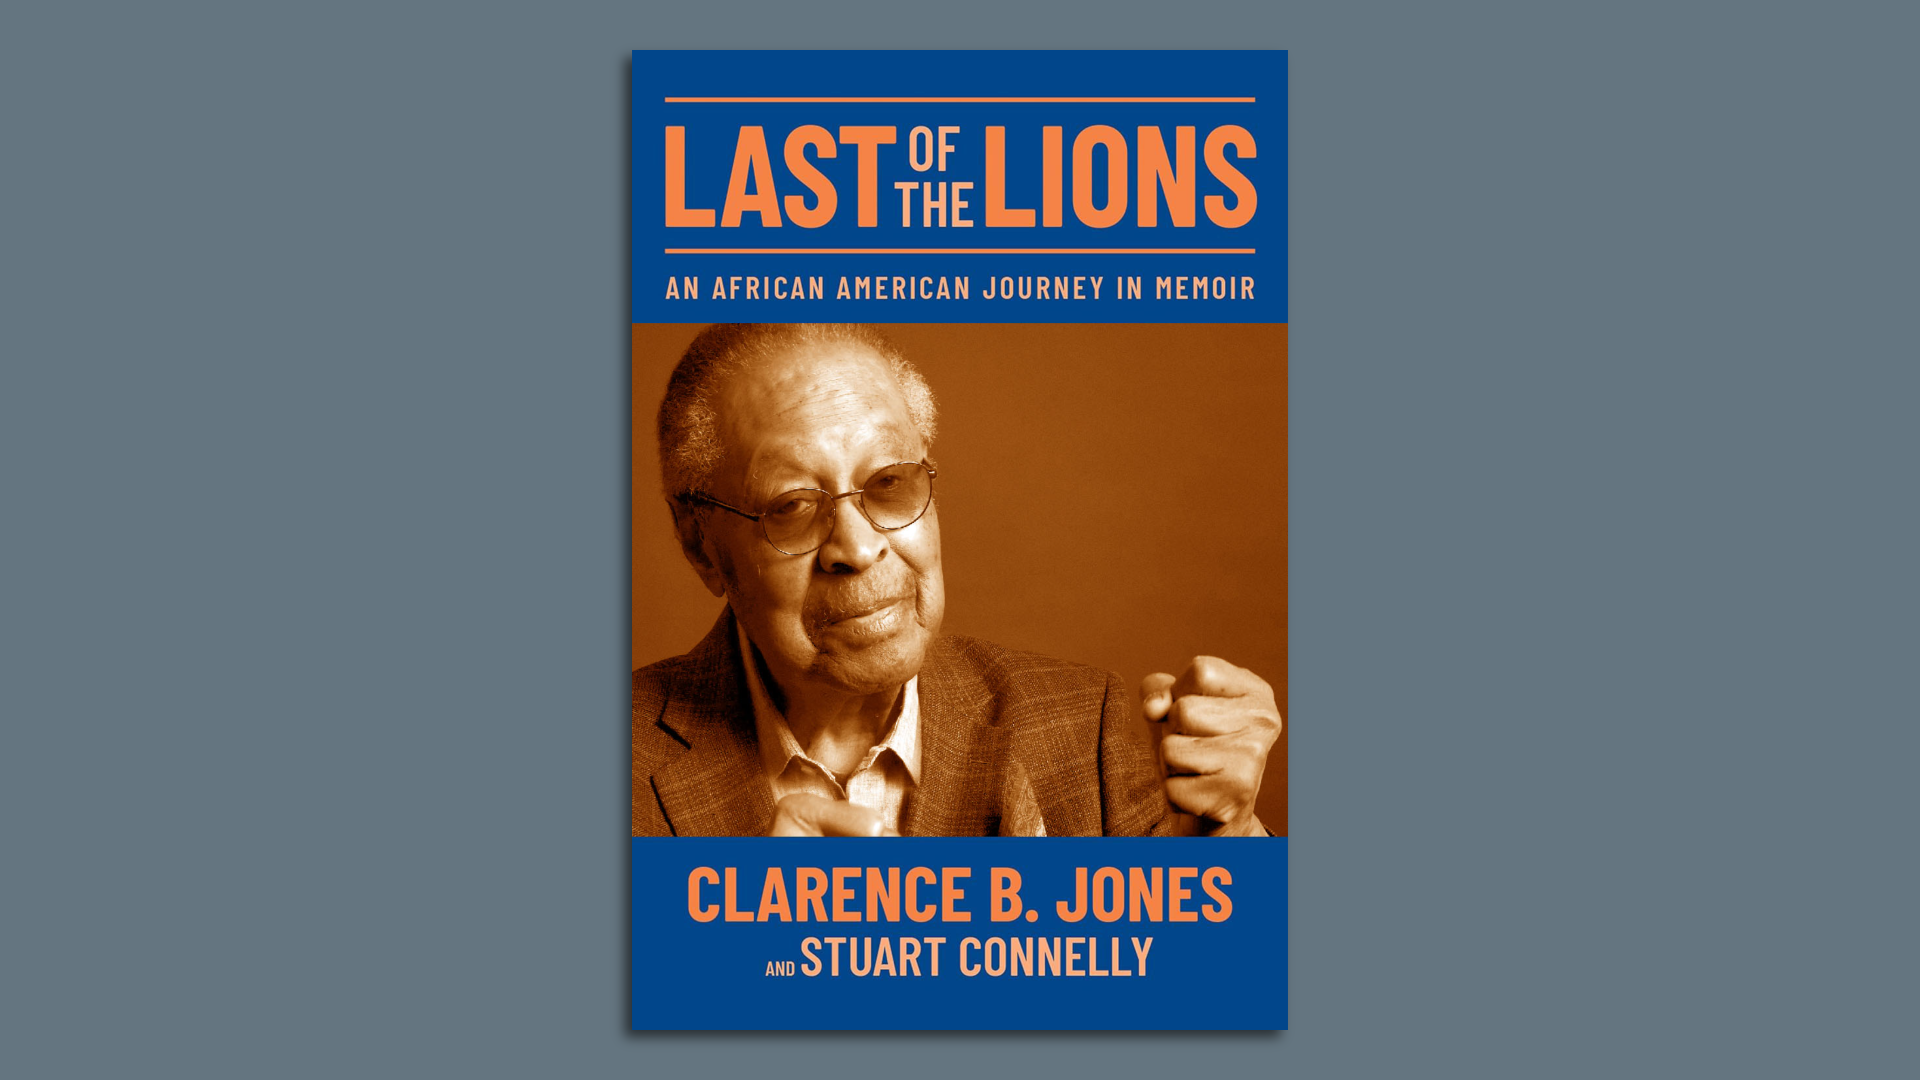 The book cover for "Last of the Lions"